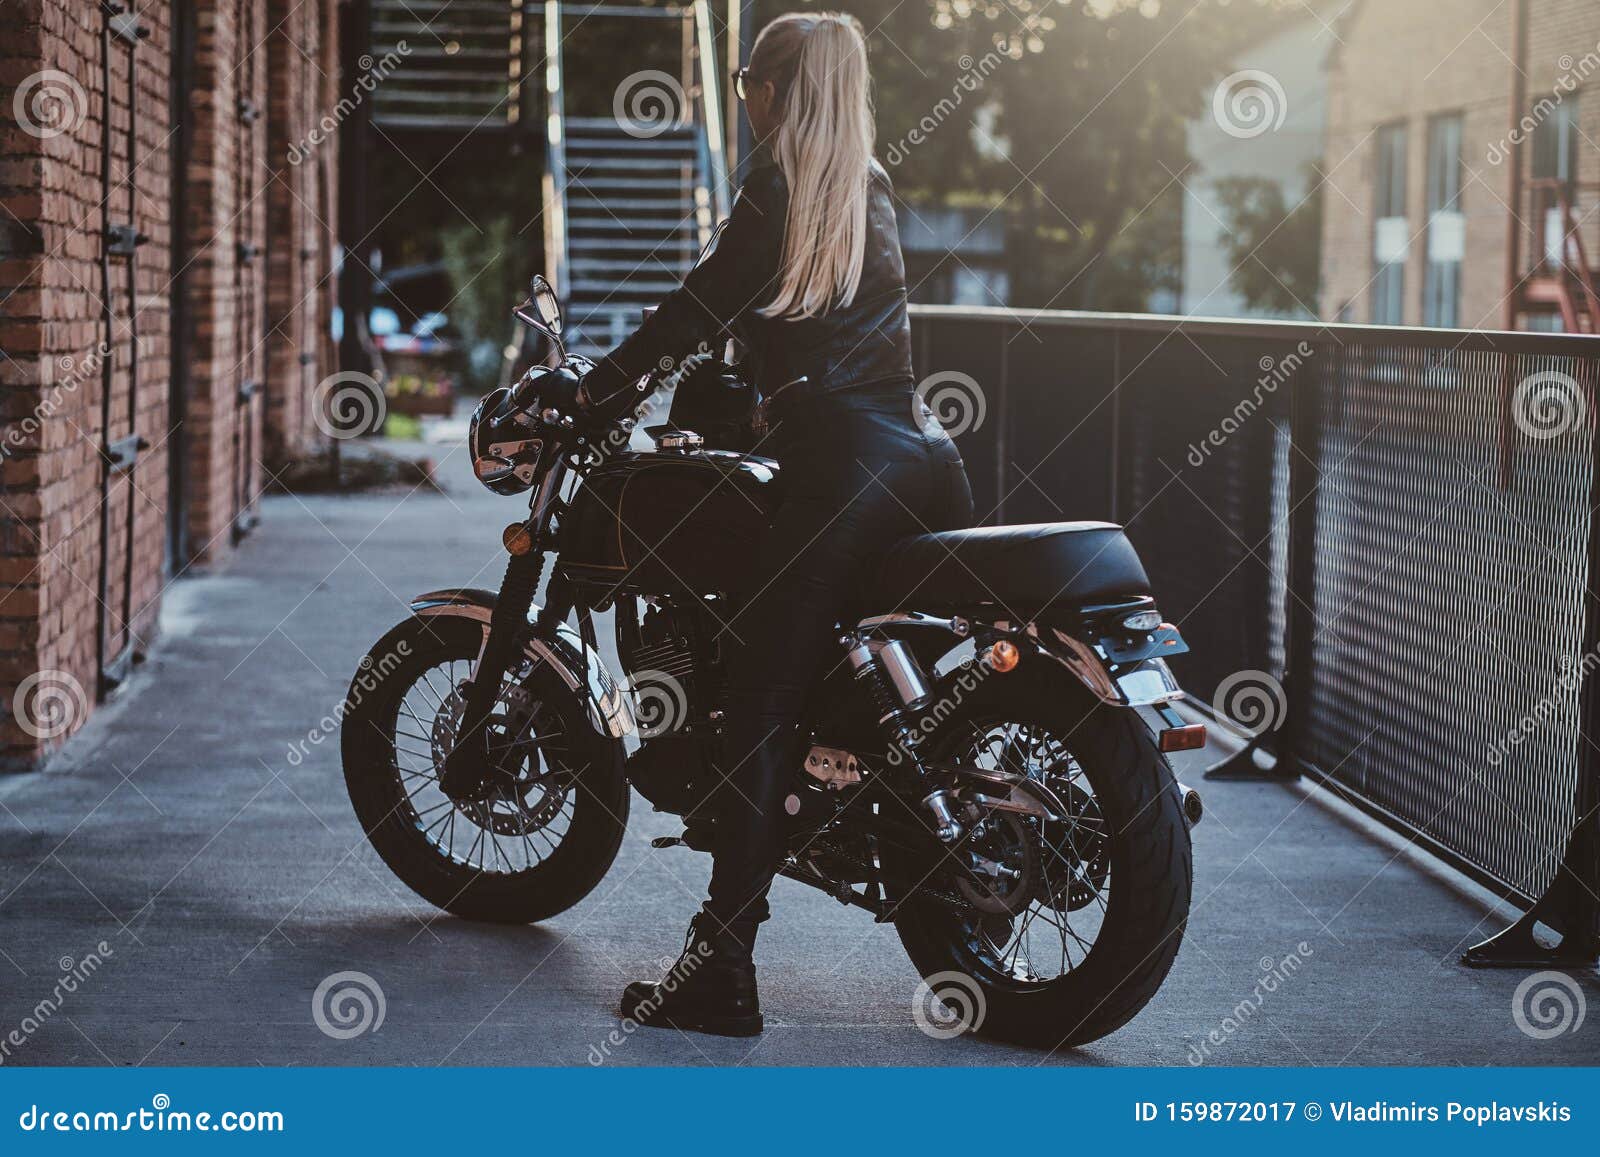 Woman on red motorcycle stock image. Image of rider 